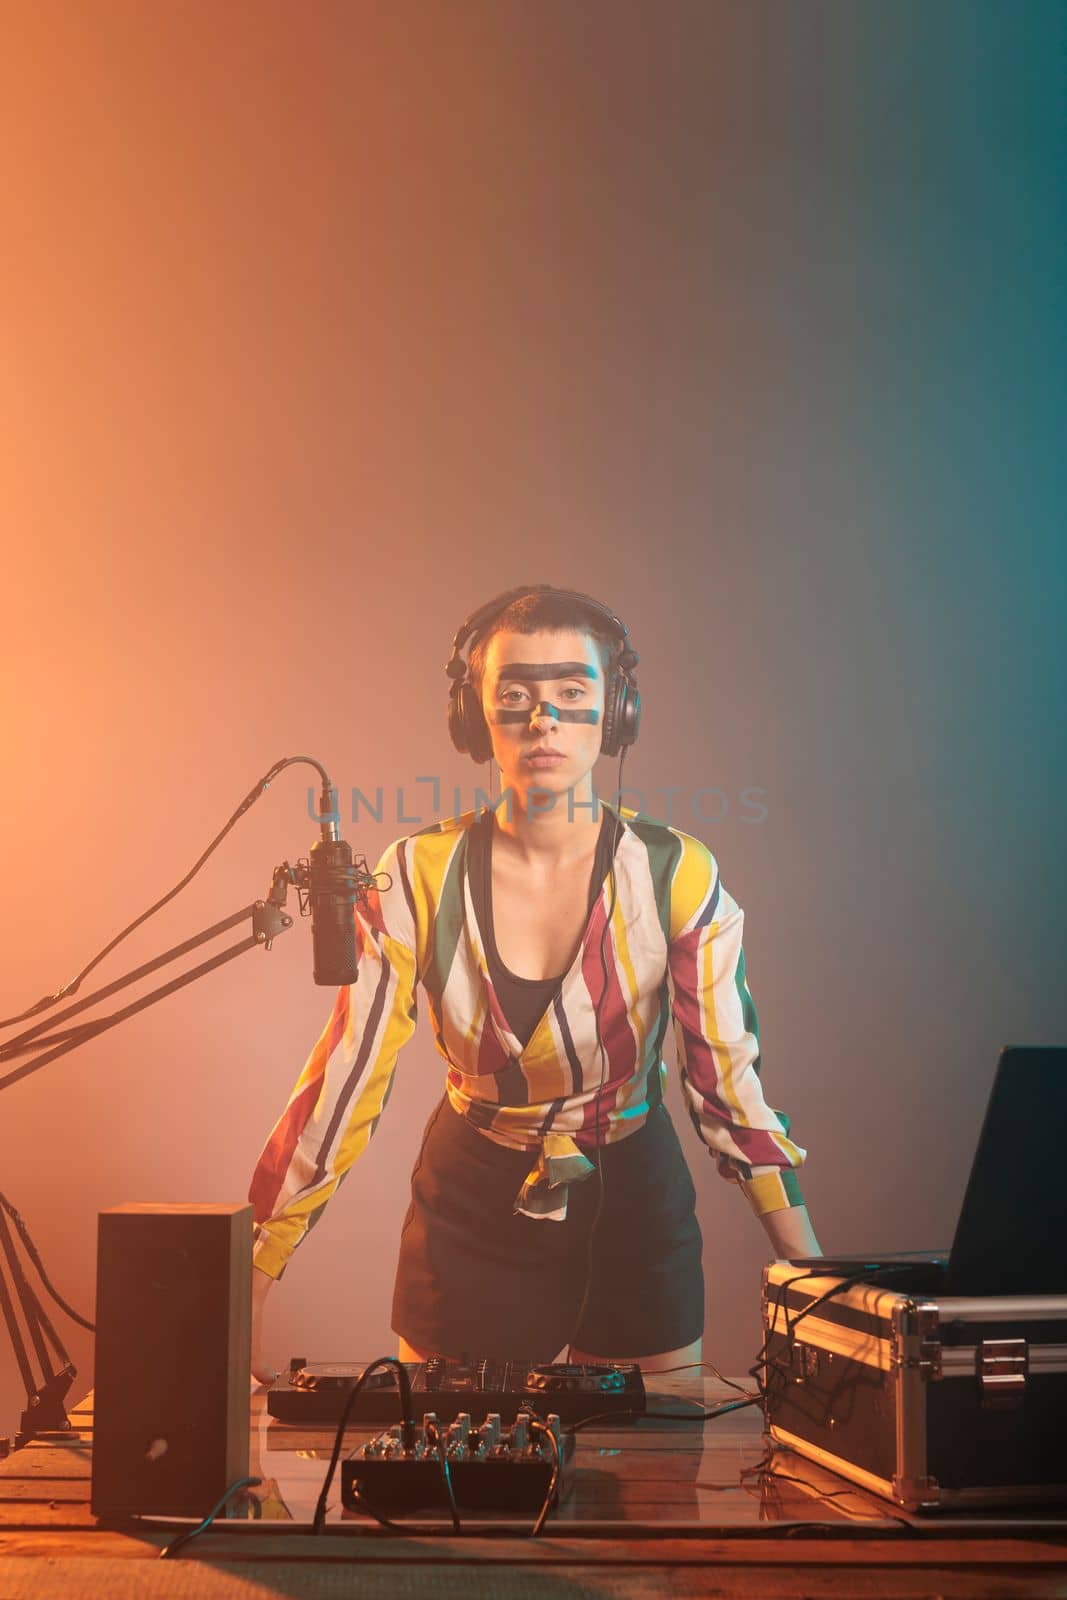 Modern artist standing at turntables and mixing equipment, using audio instruments or mixer to perform techno music. Serious musician with crazy make up doing remix with bass key and buttons.